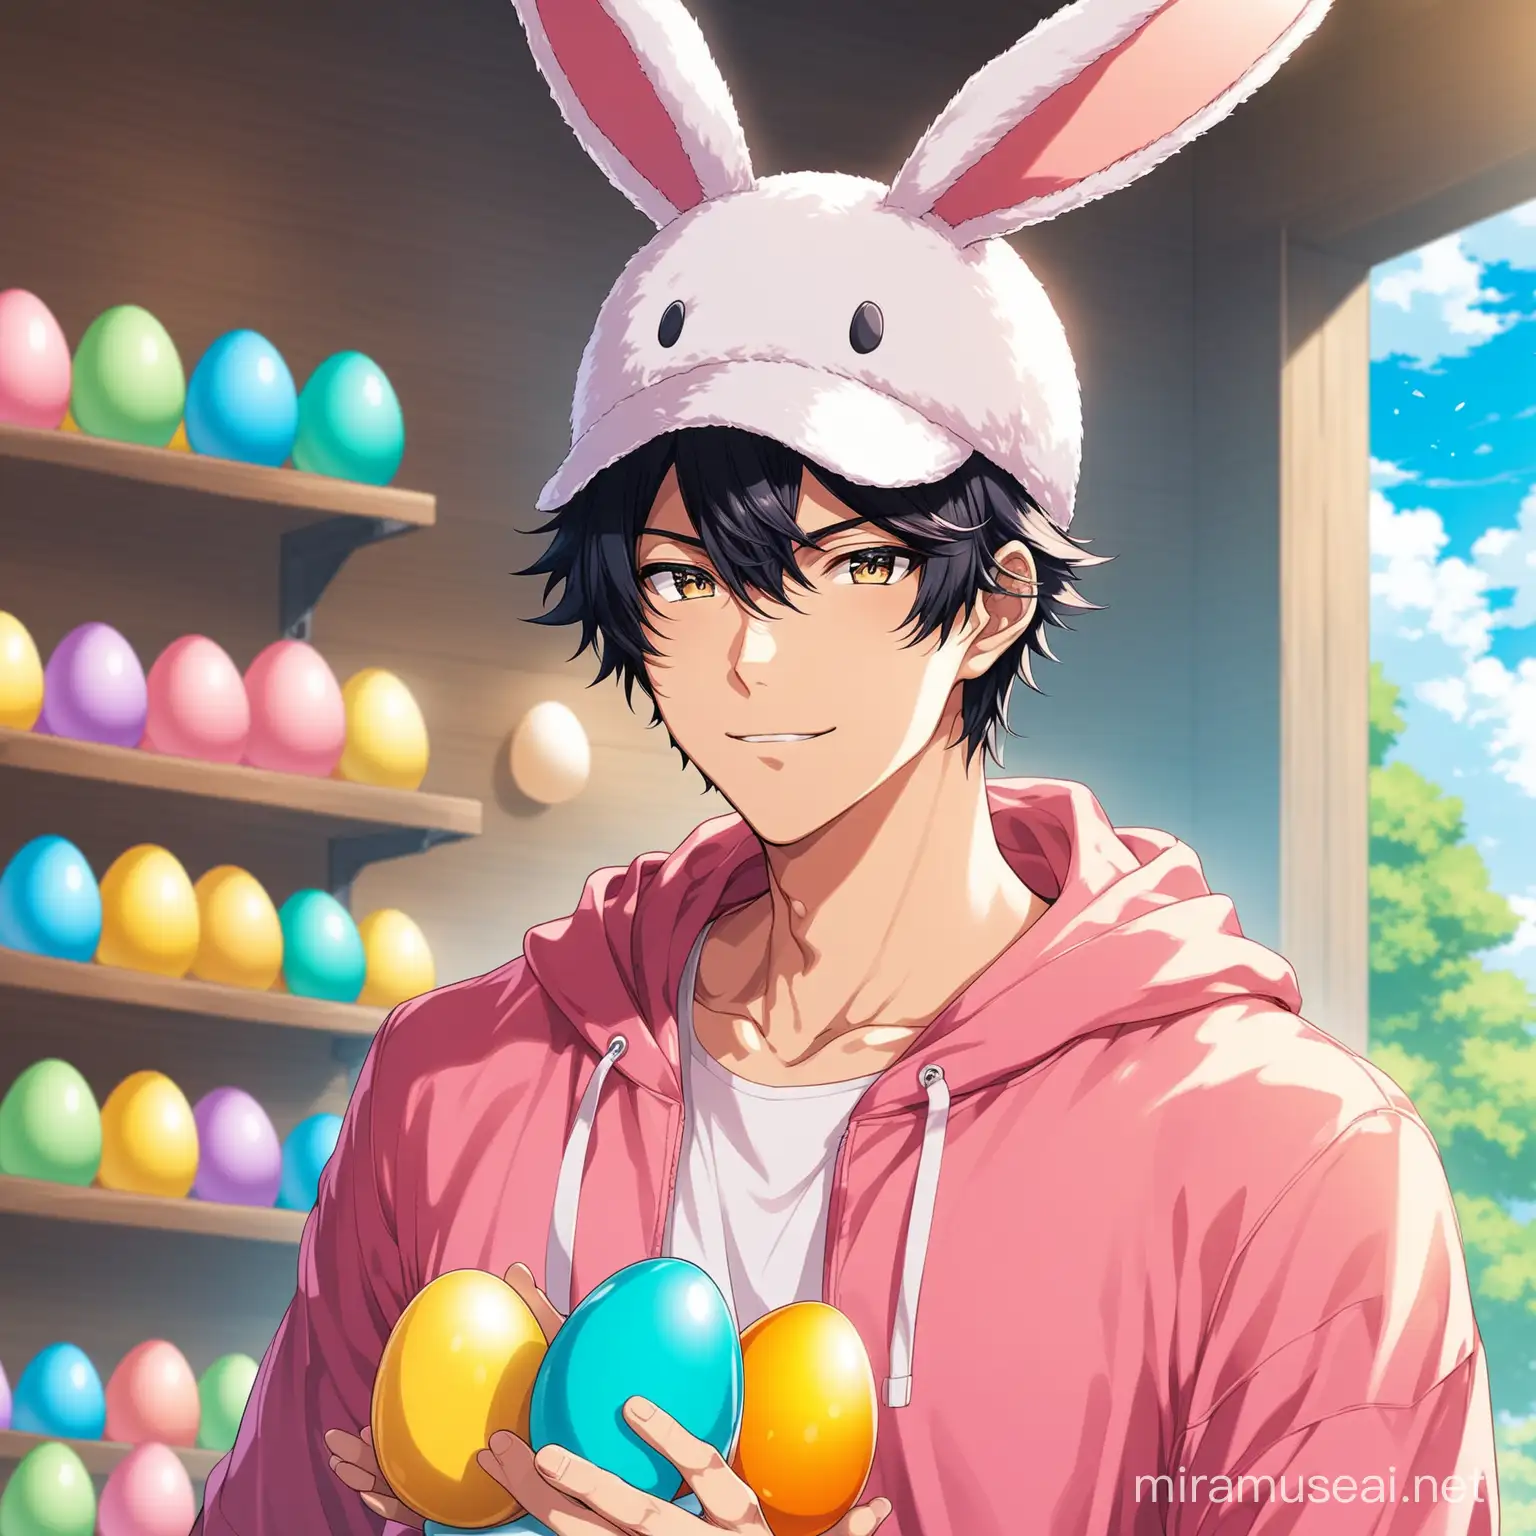 Cool Anime man with bunny hat and Easter egg in background